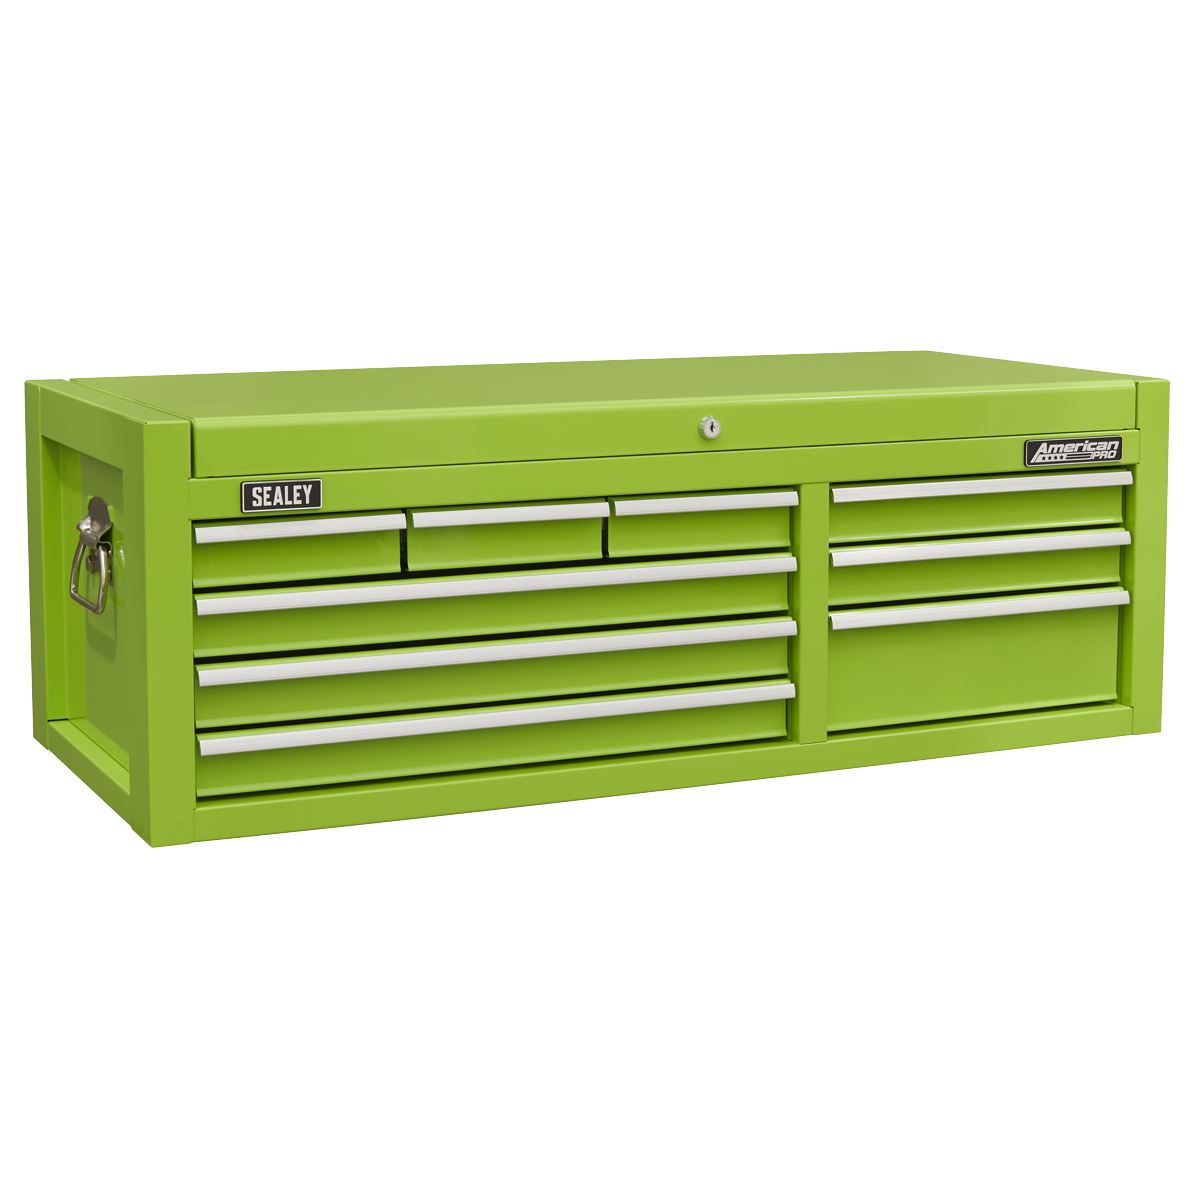 Sealey American Pro Topchest 9 Drawer with Ball Bearing Slides - Green